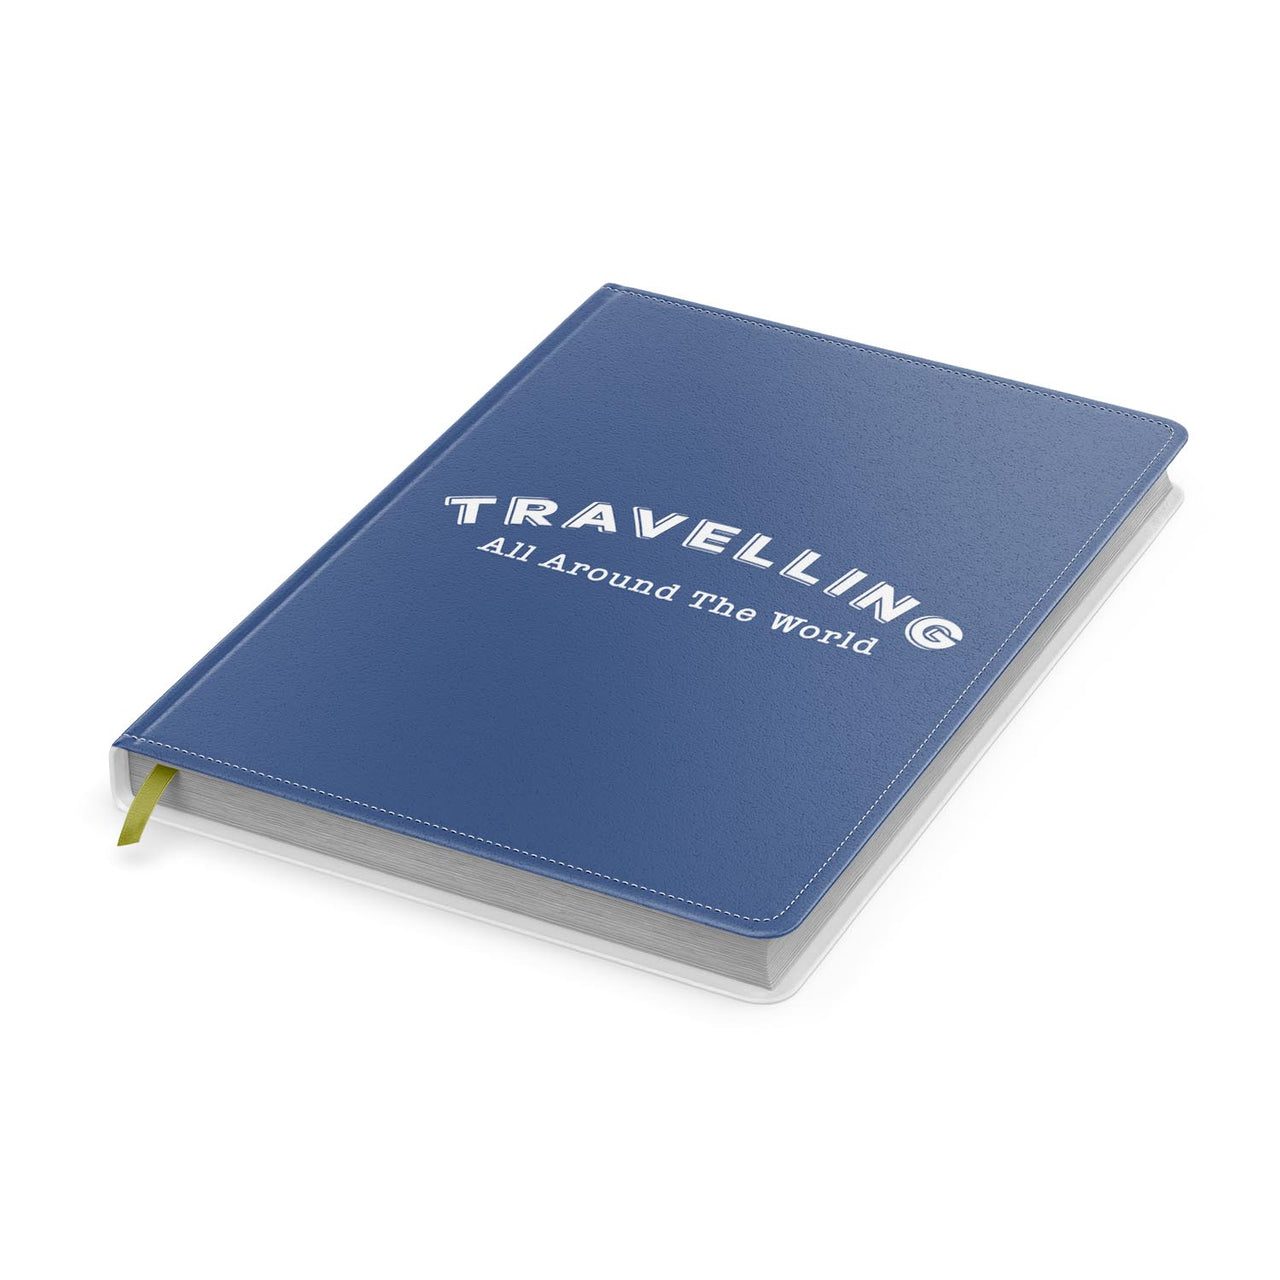 Travelling All Around The World Designed Notebooks